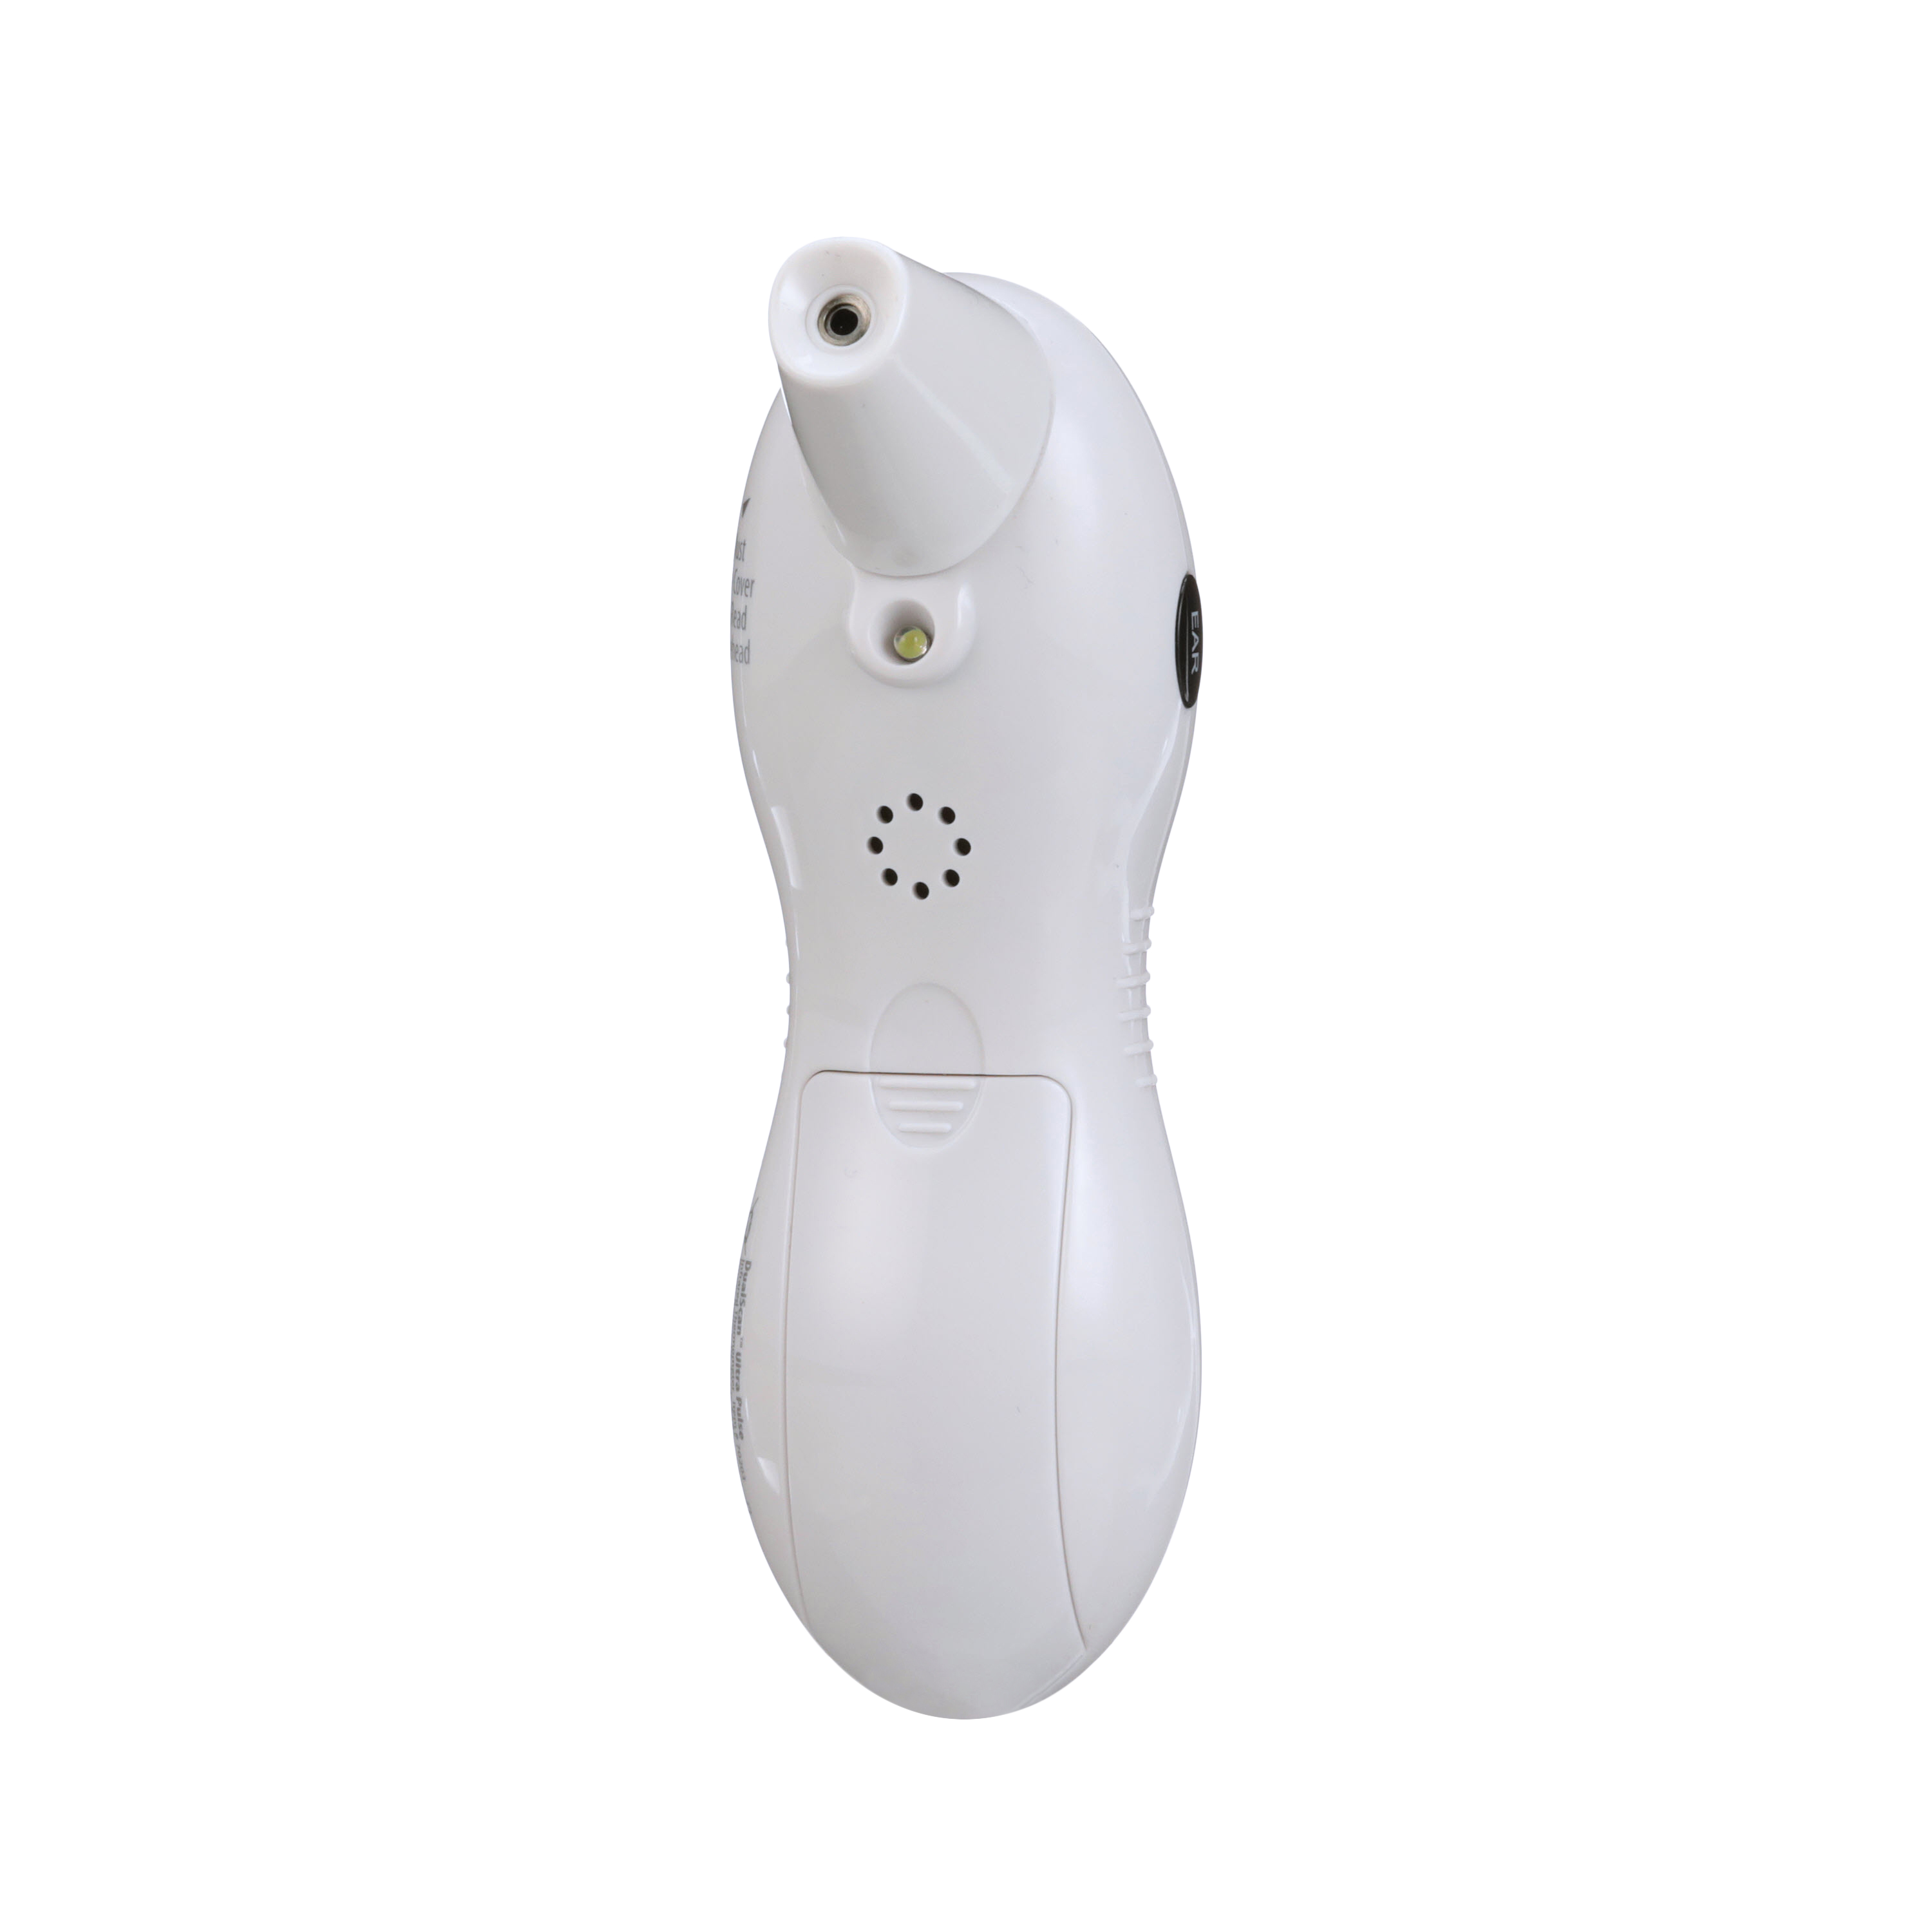 DualScan Ultra Pulse Talking Ear & Forehead Thermometer